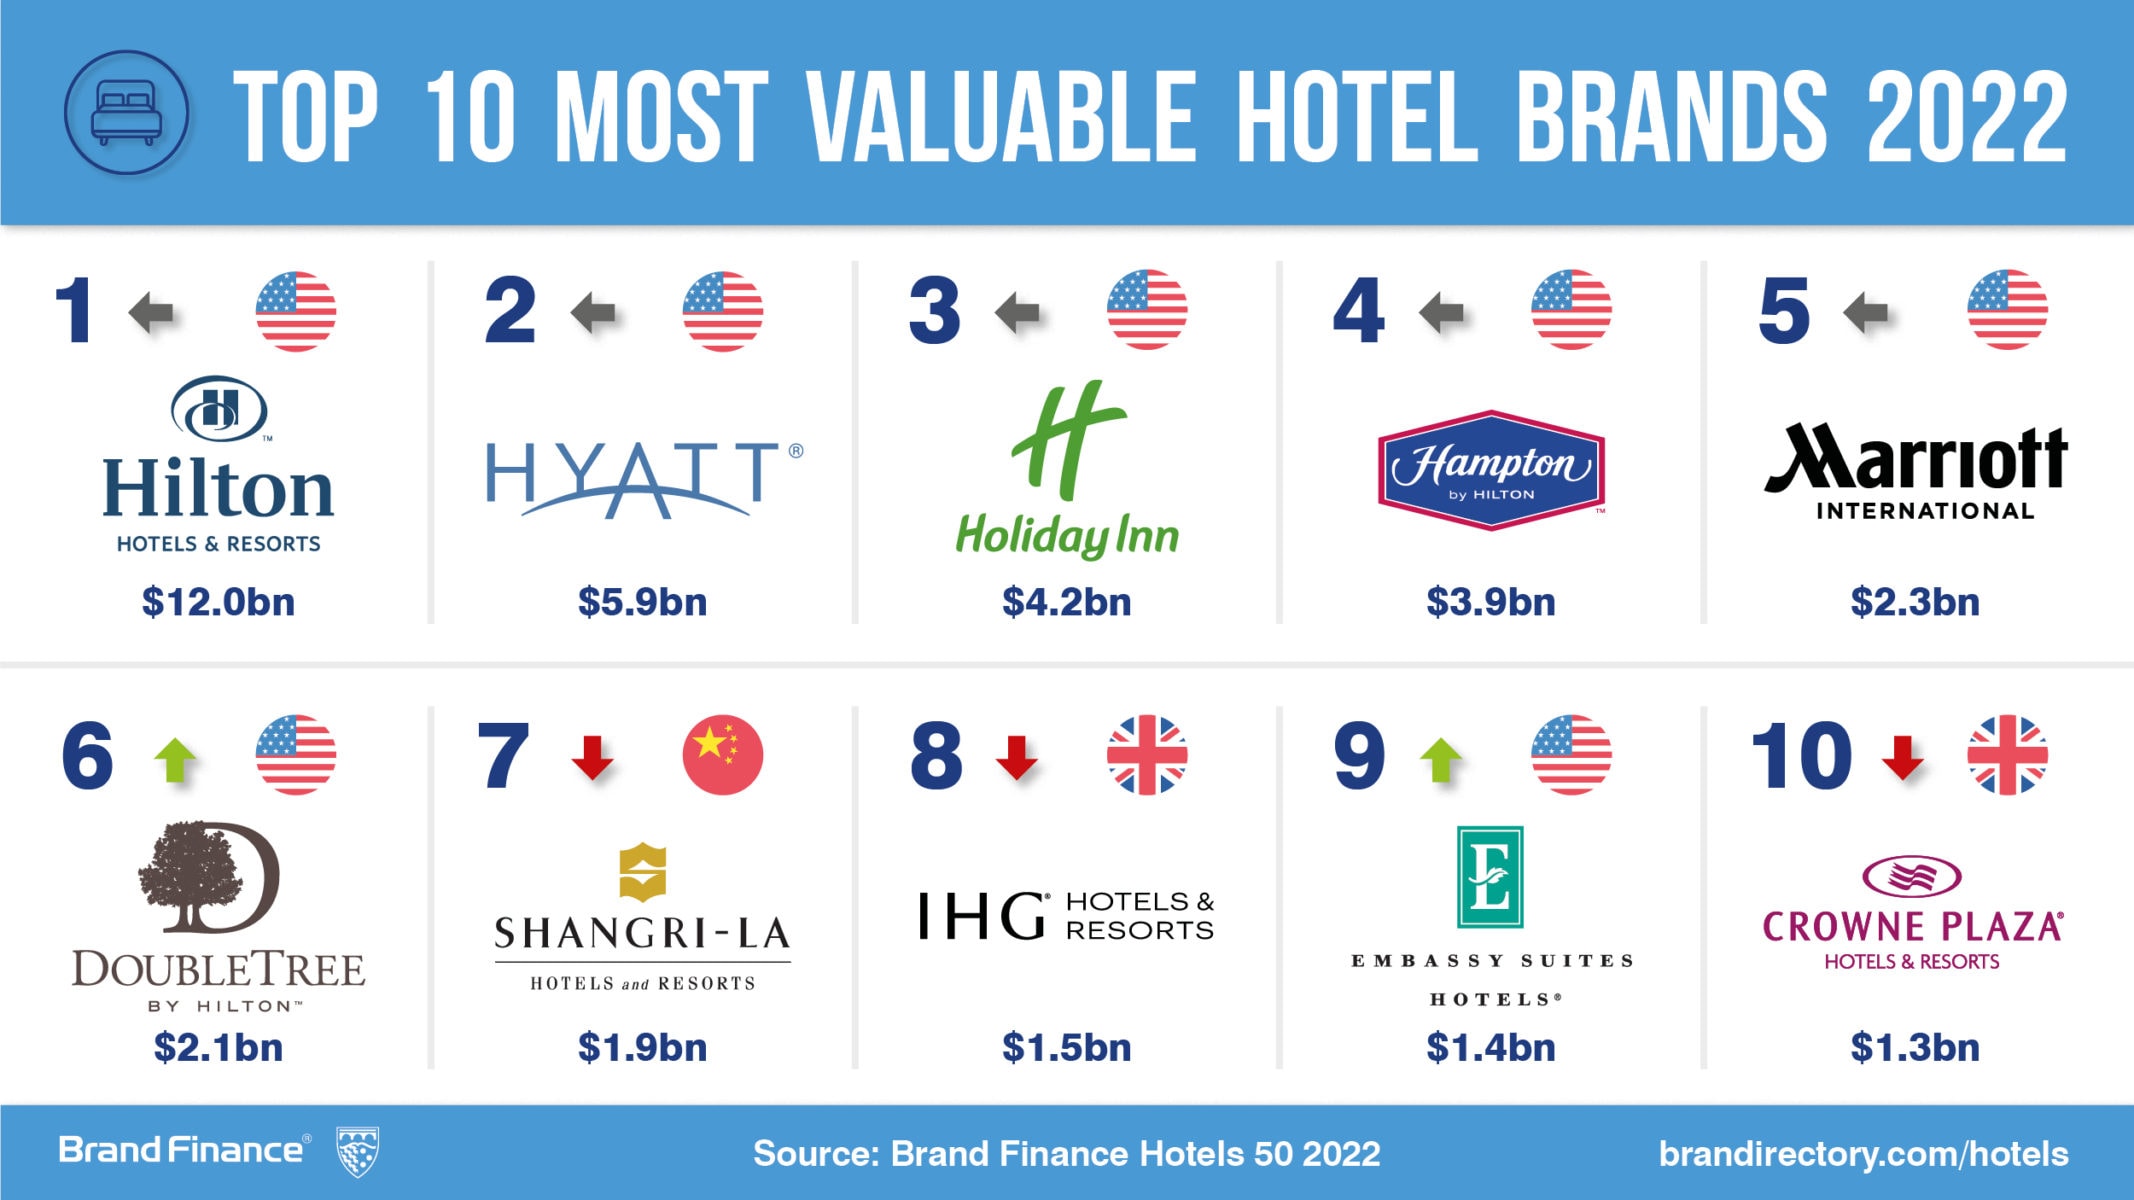 The positioning of the four most valuable luxury fashion brands